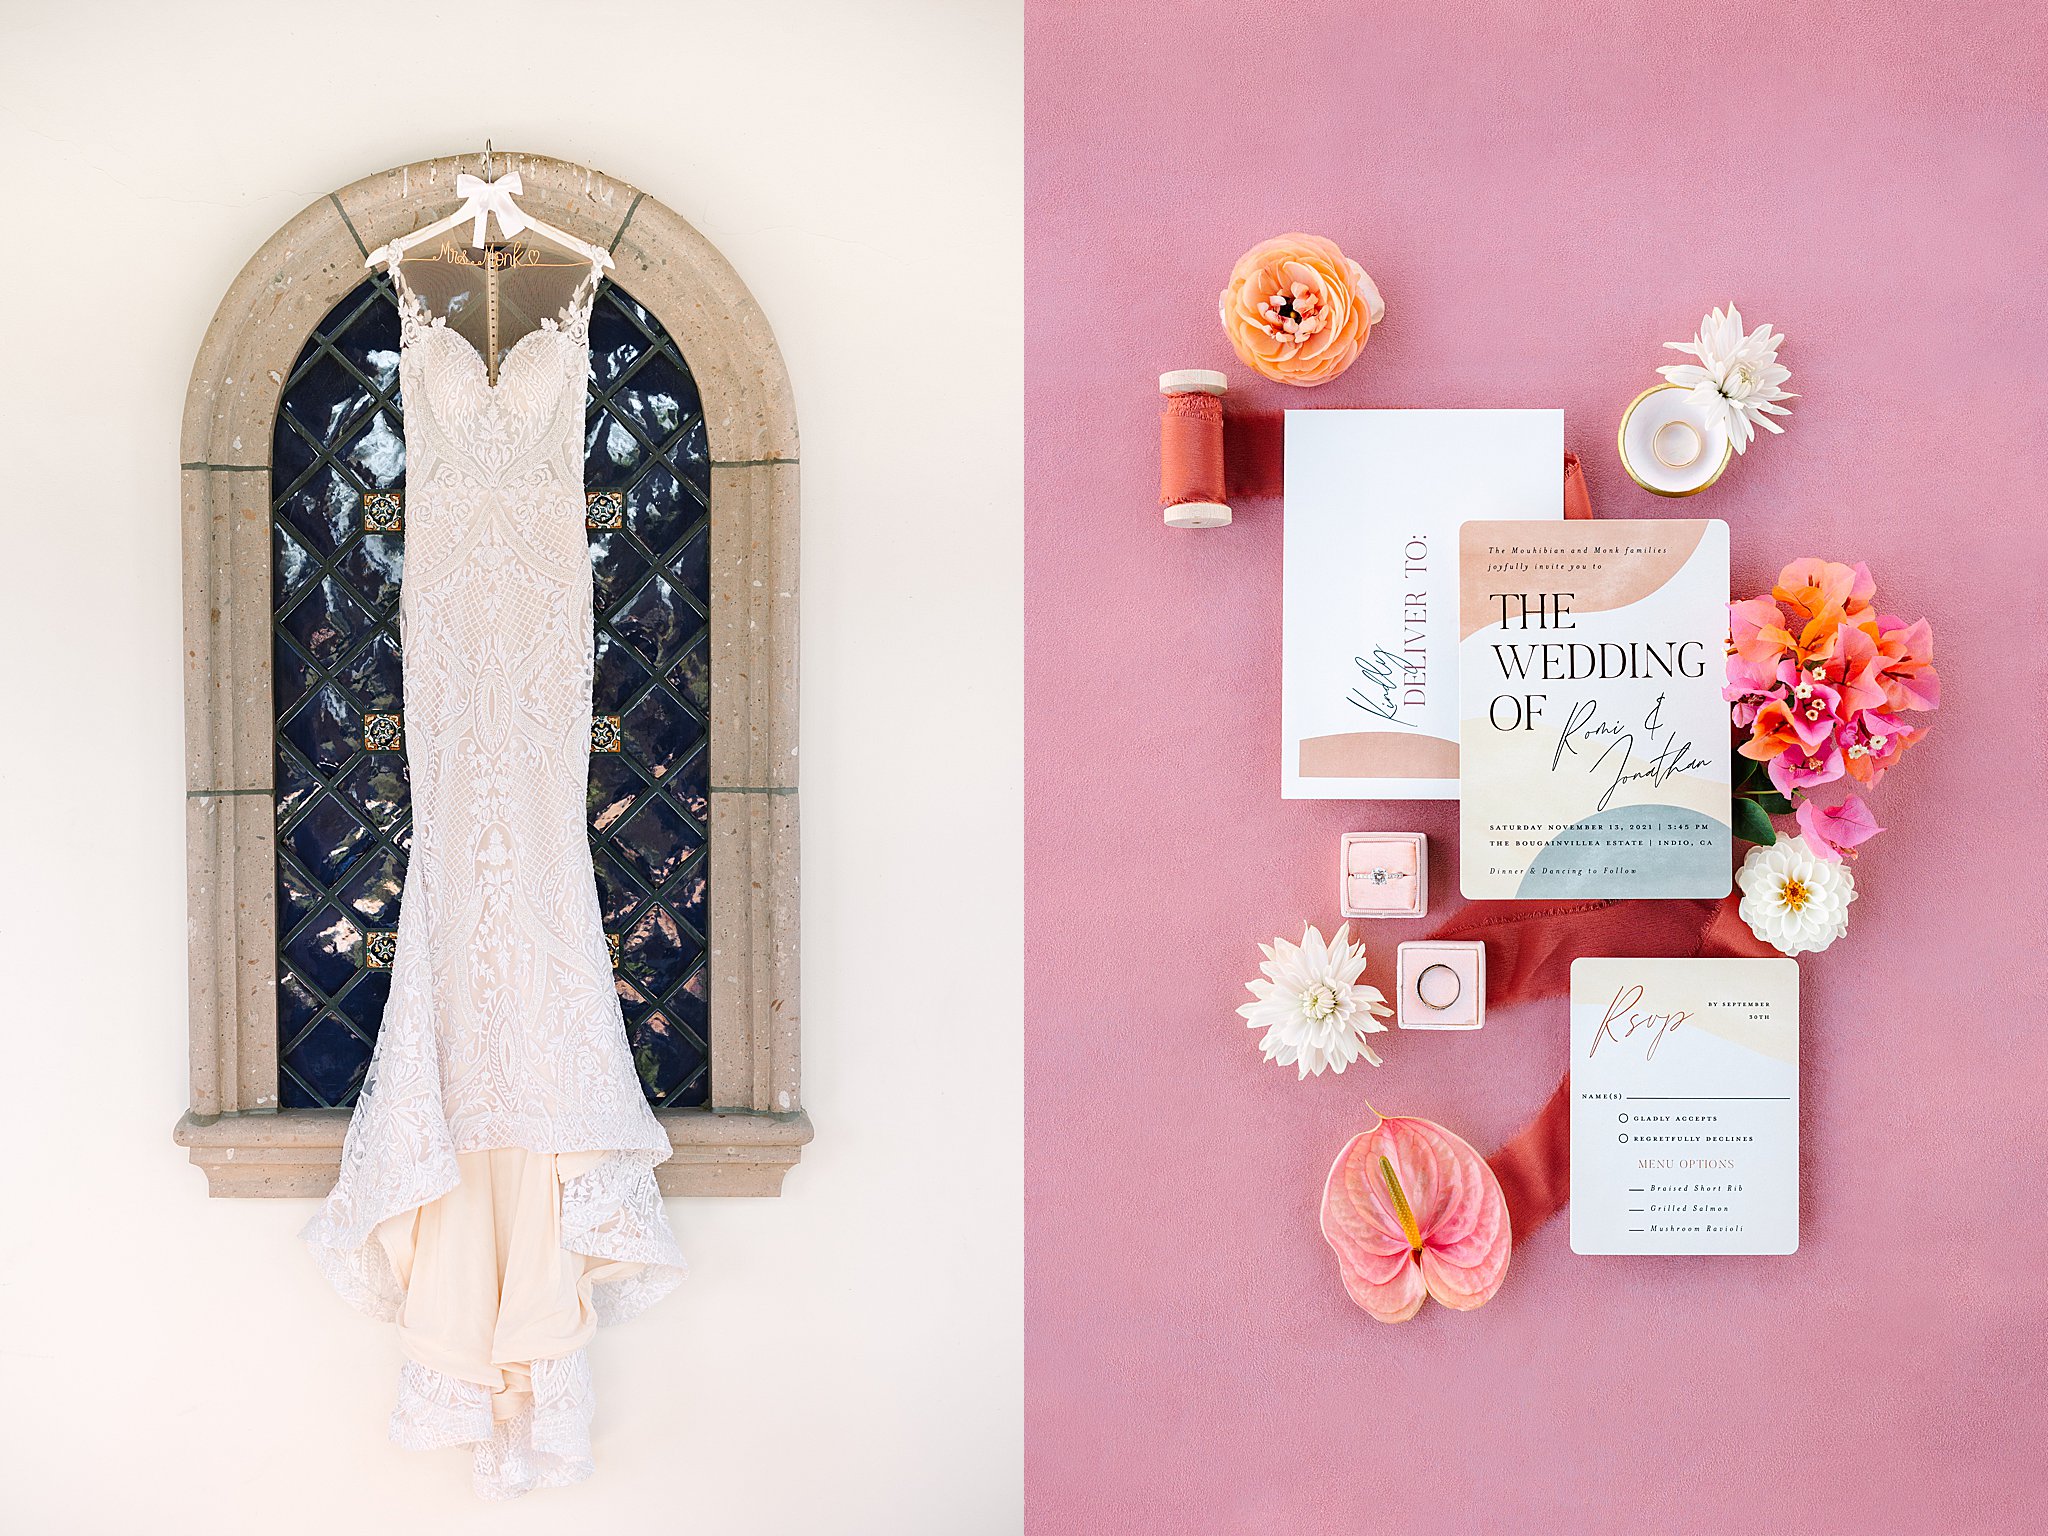 Romi's wedding dress, paired with minted envelopes 